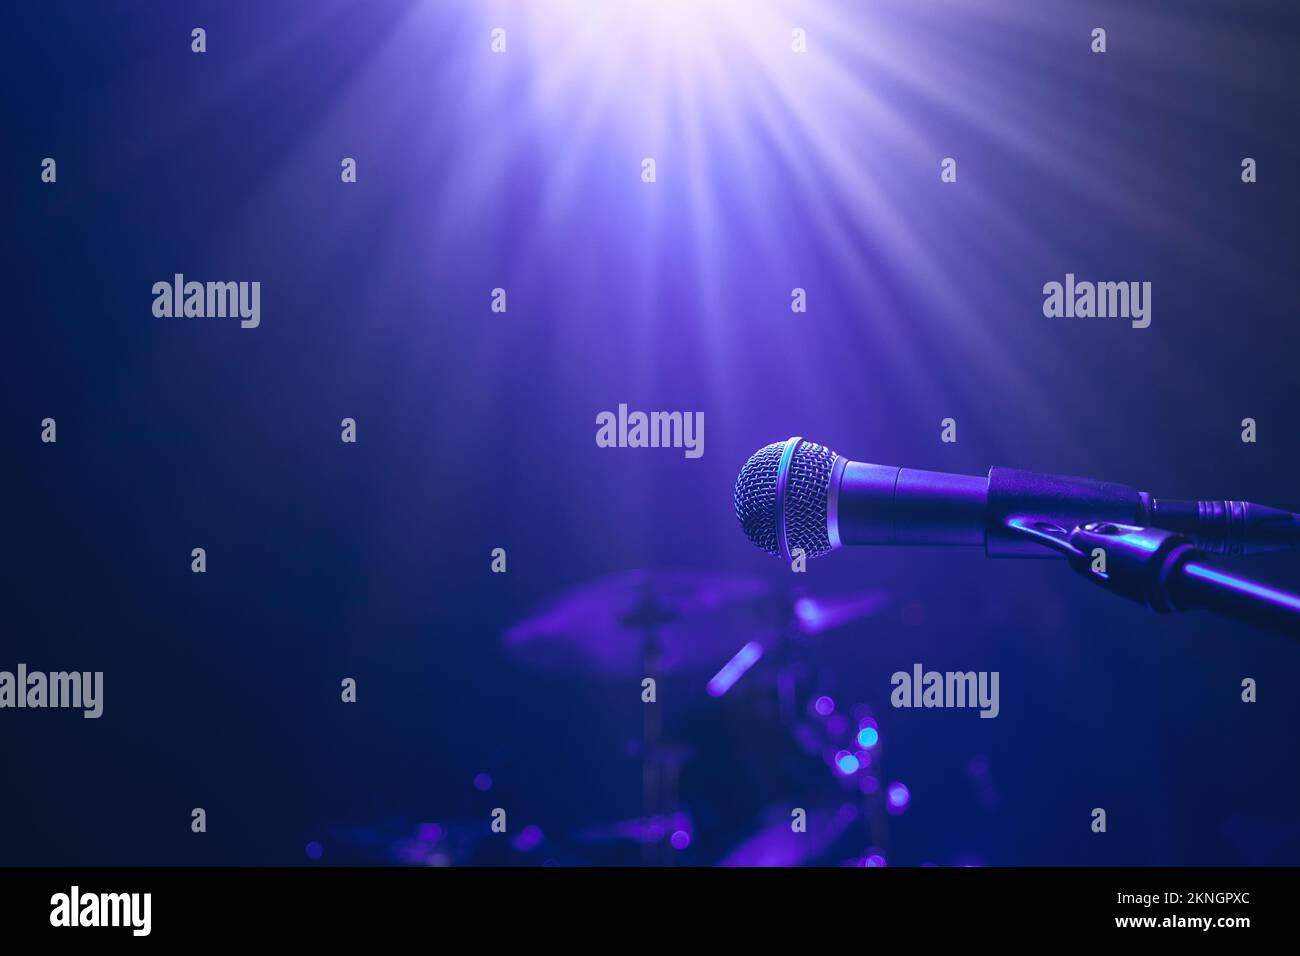 Selective focus on lluminated microphone against drum kit on stage in blue light. Stock Photo